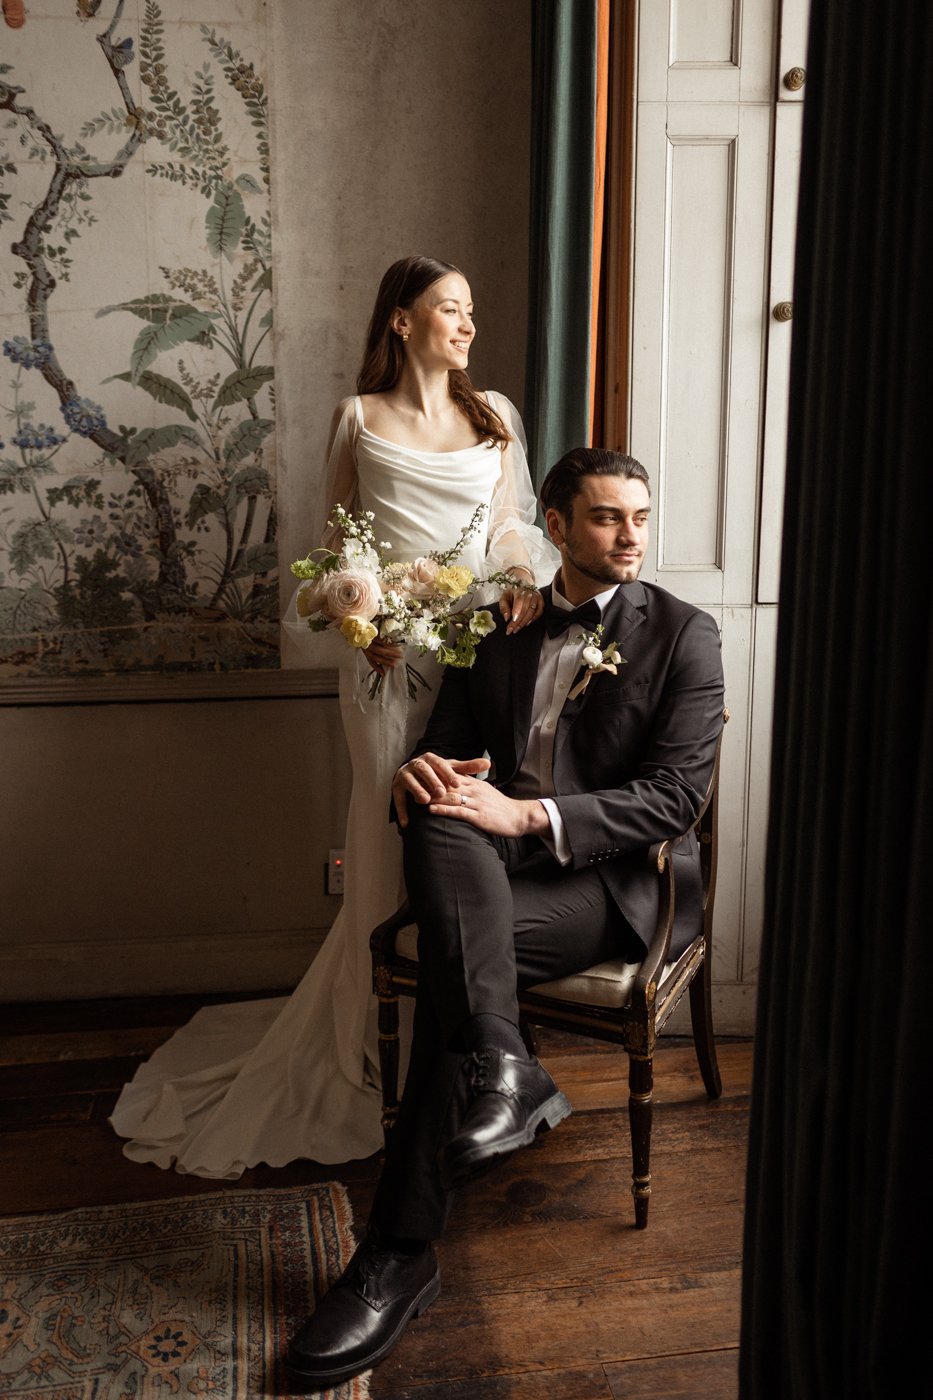 A First Look portrait of Bride and Groom 